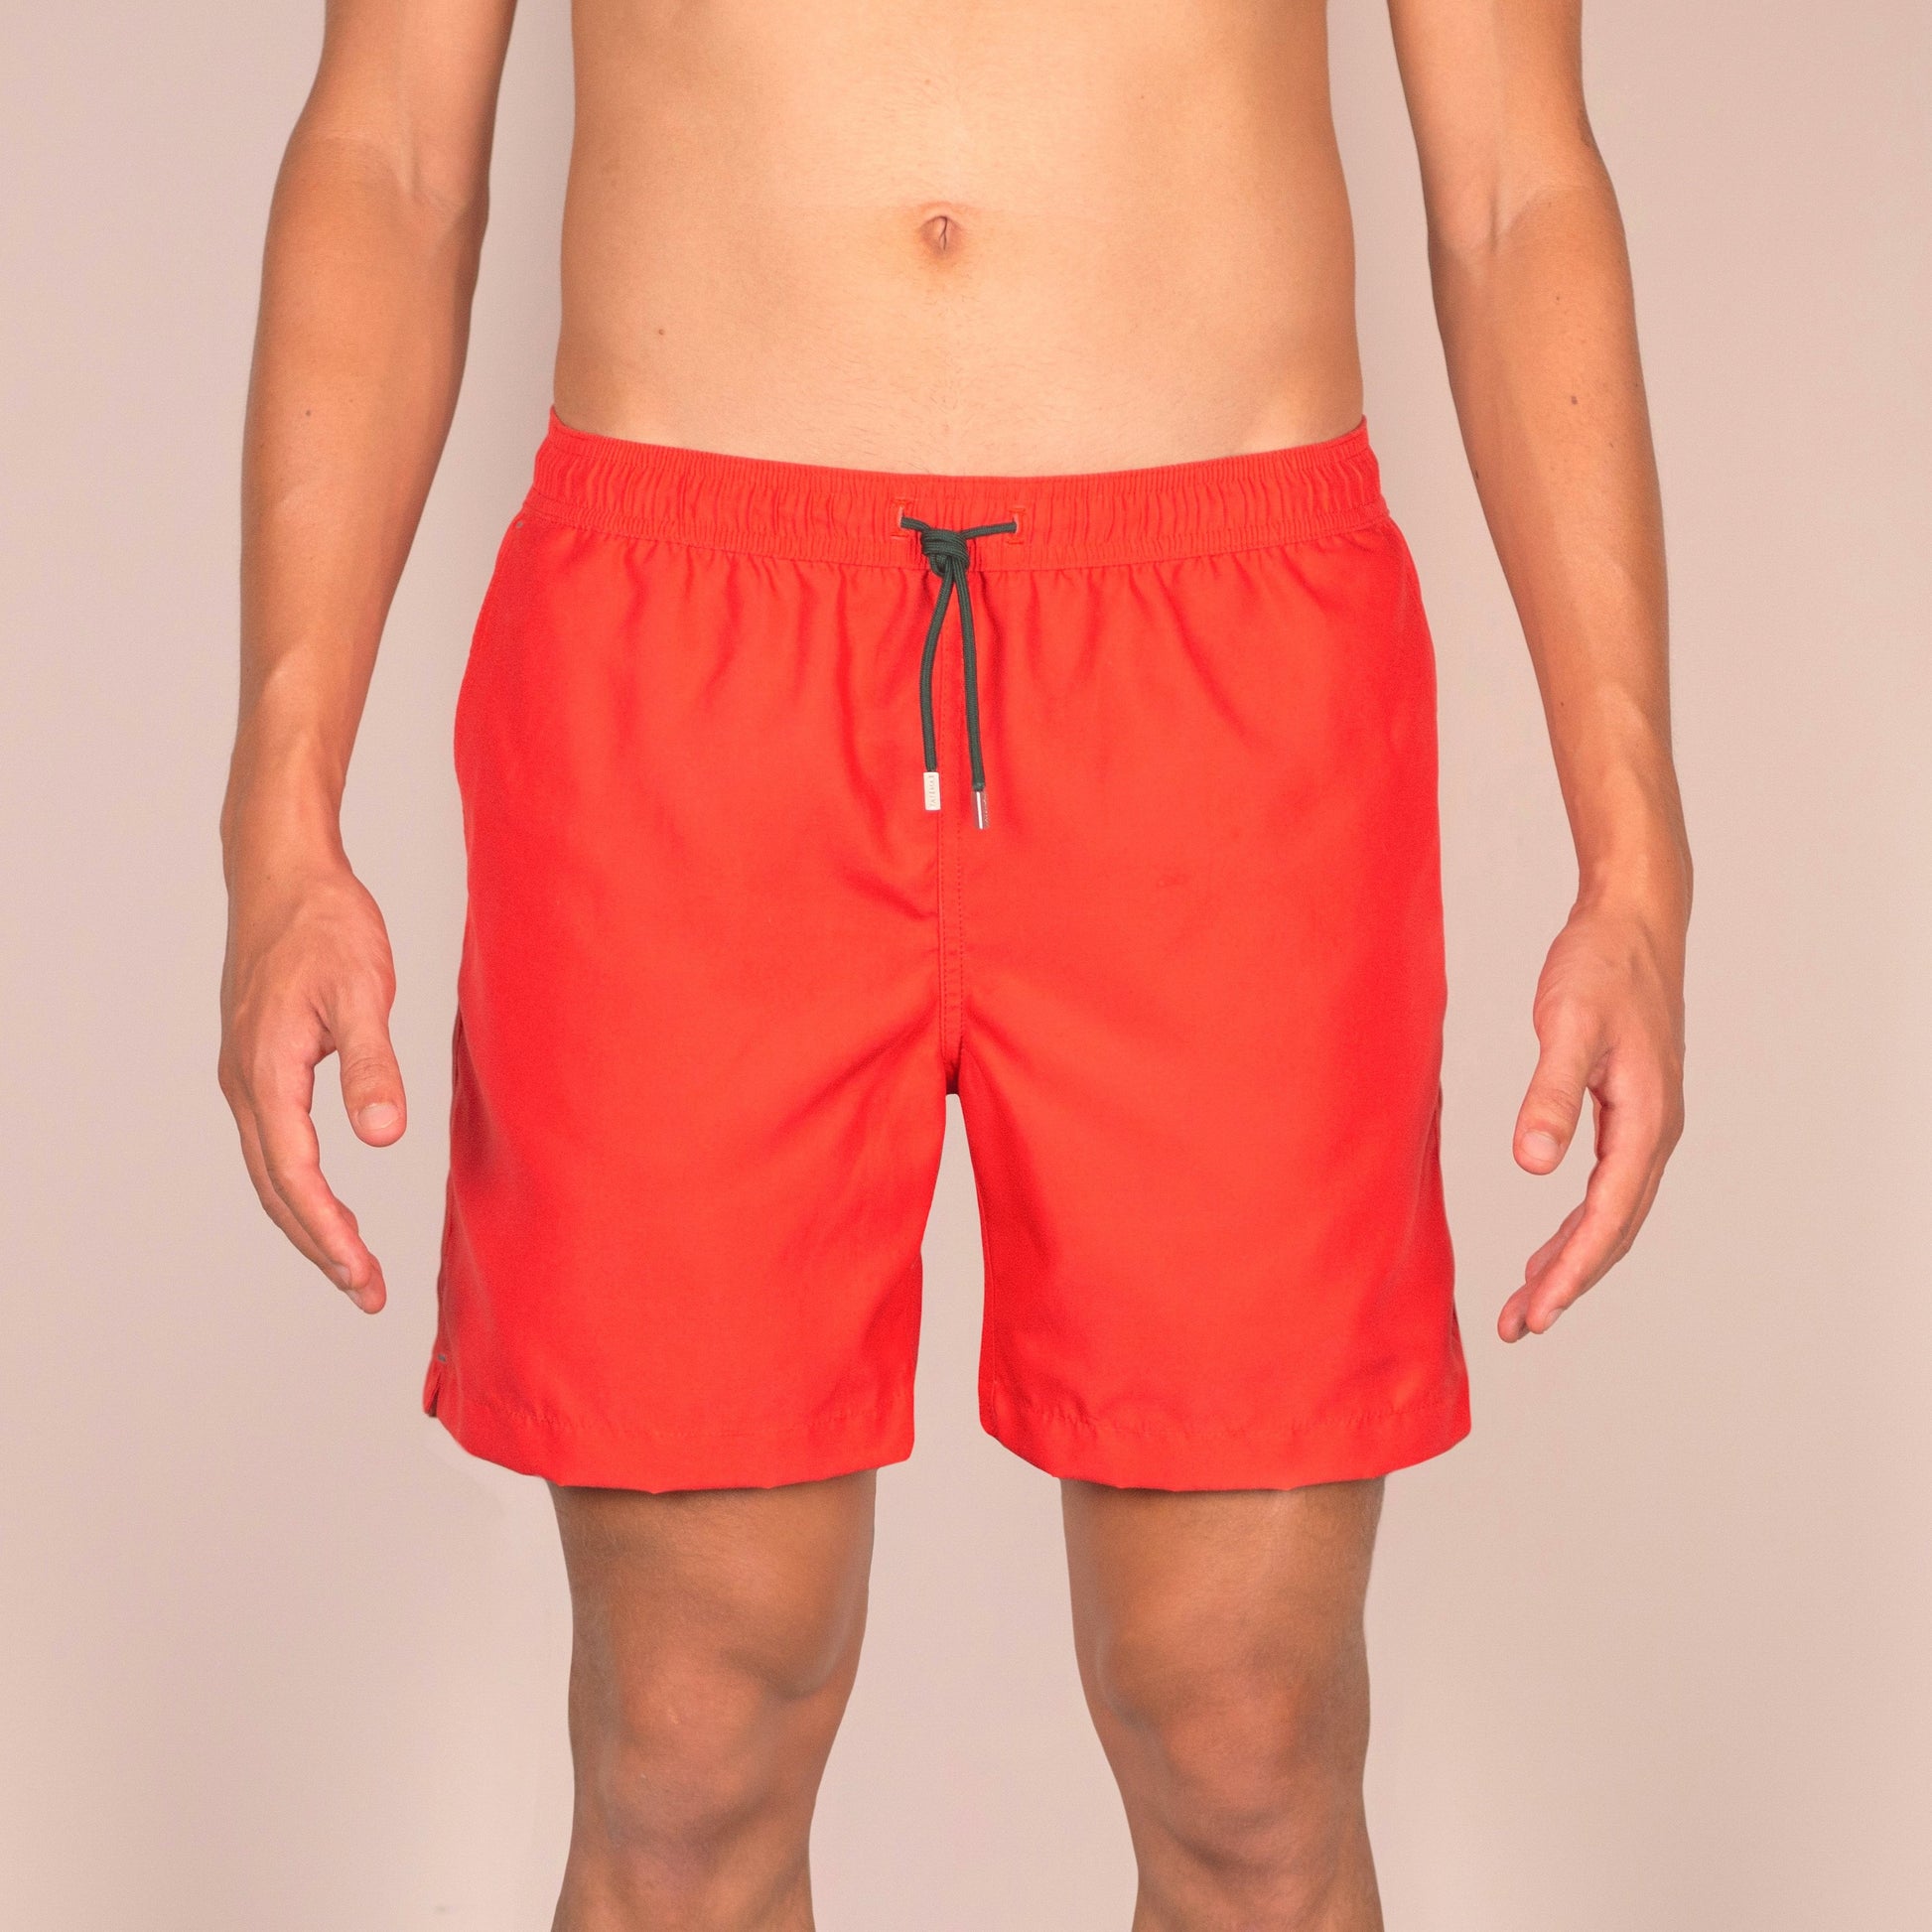 Red Swimming Trunks